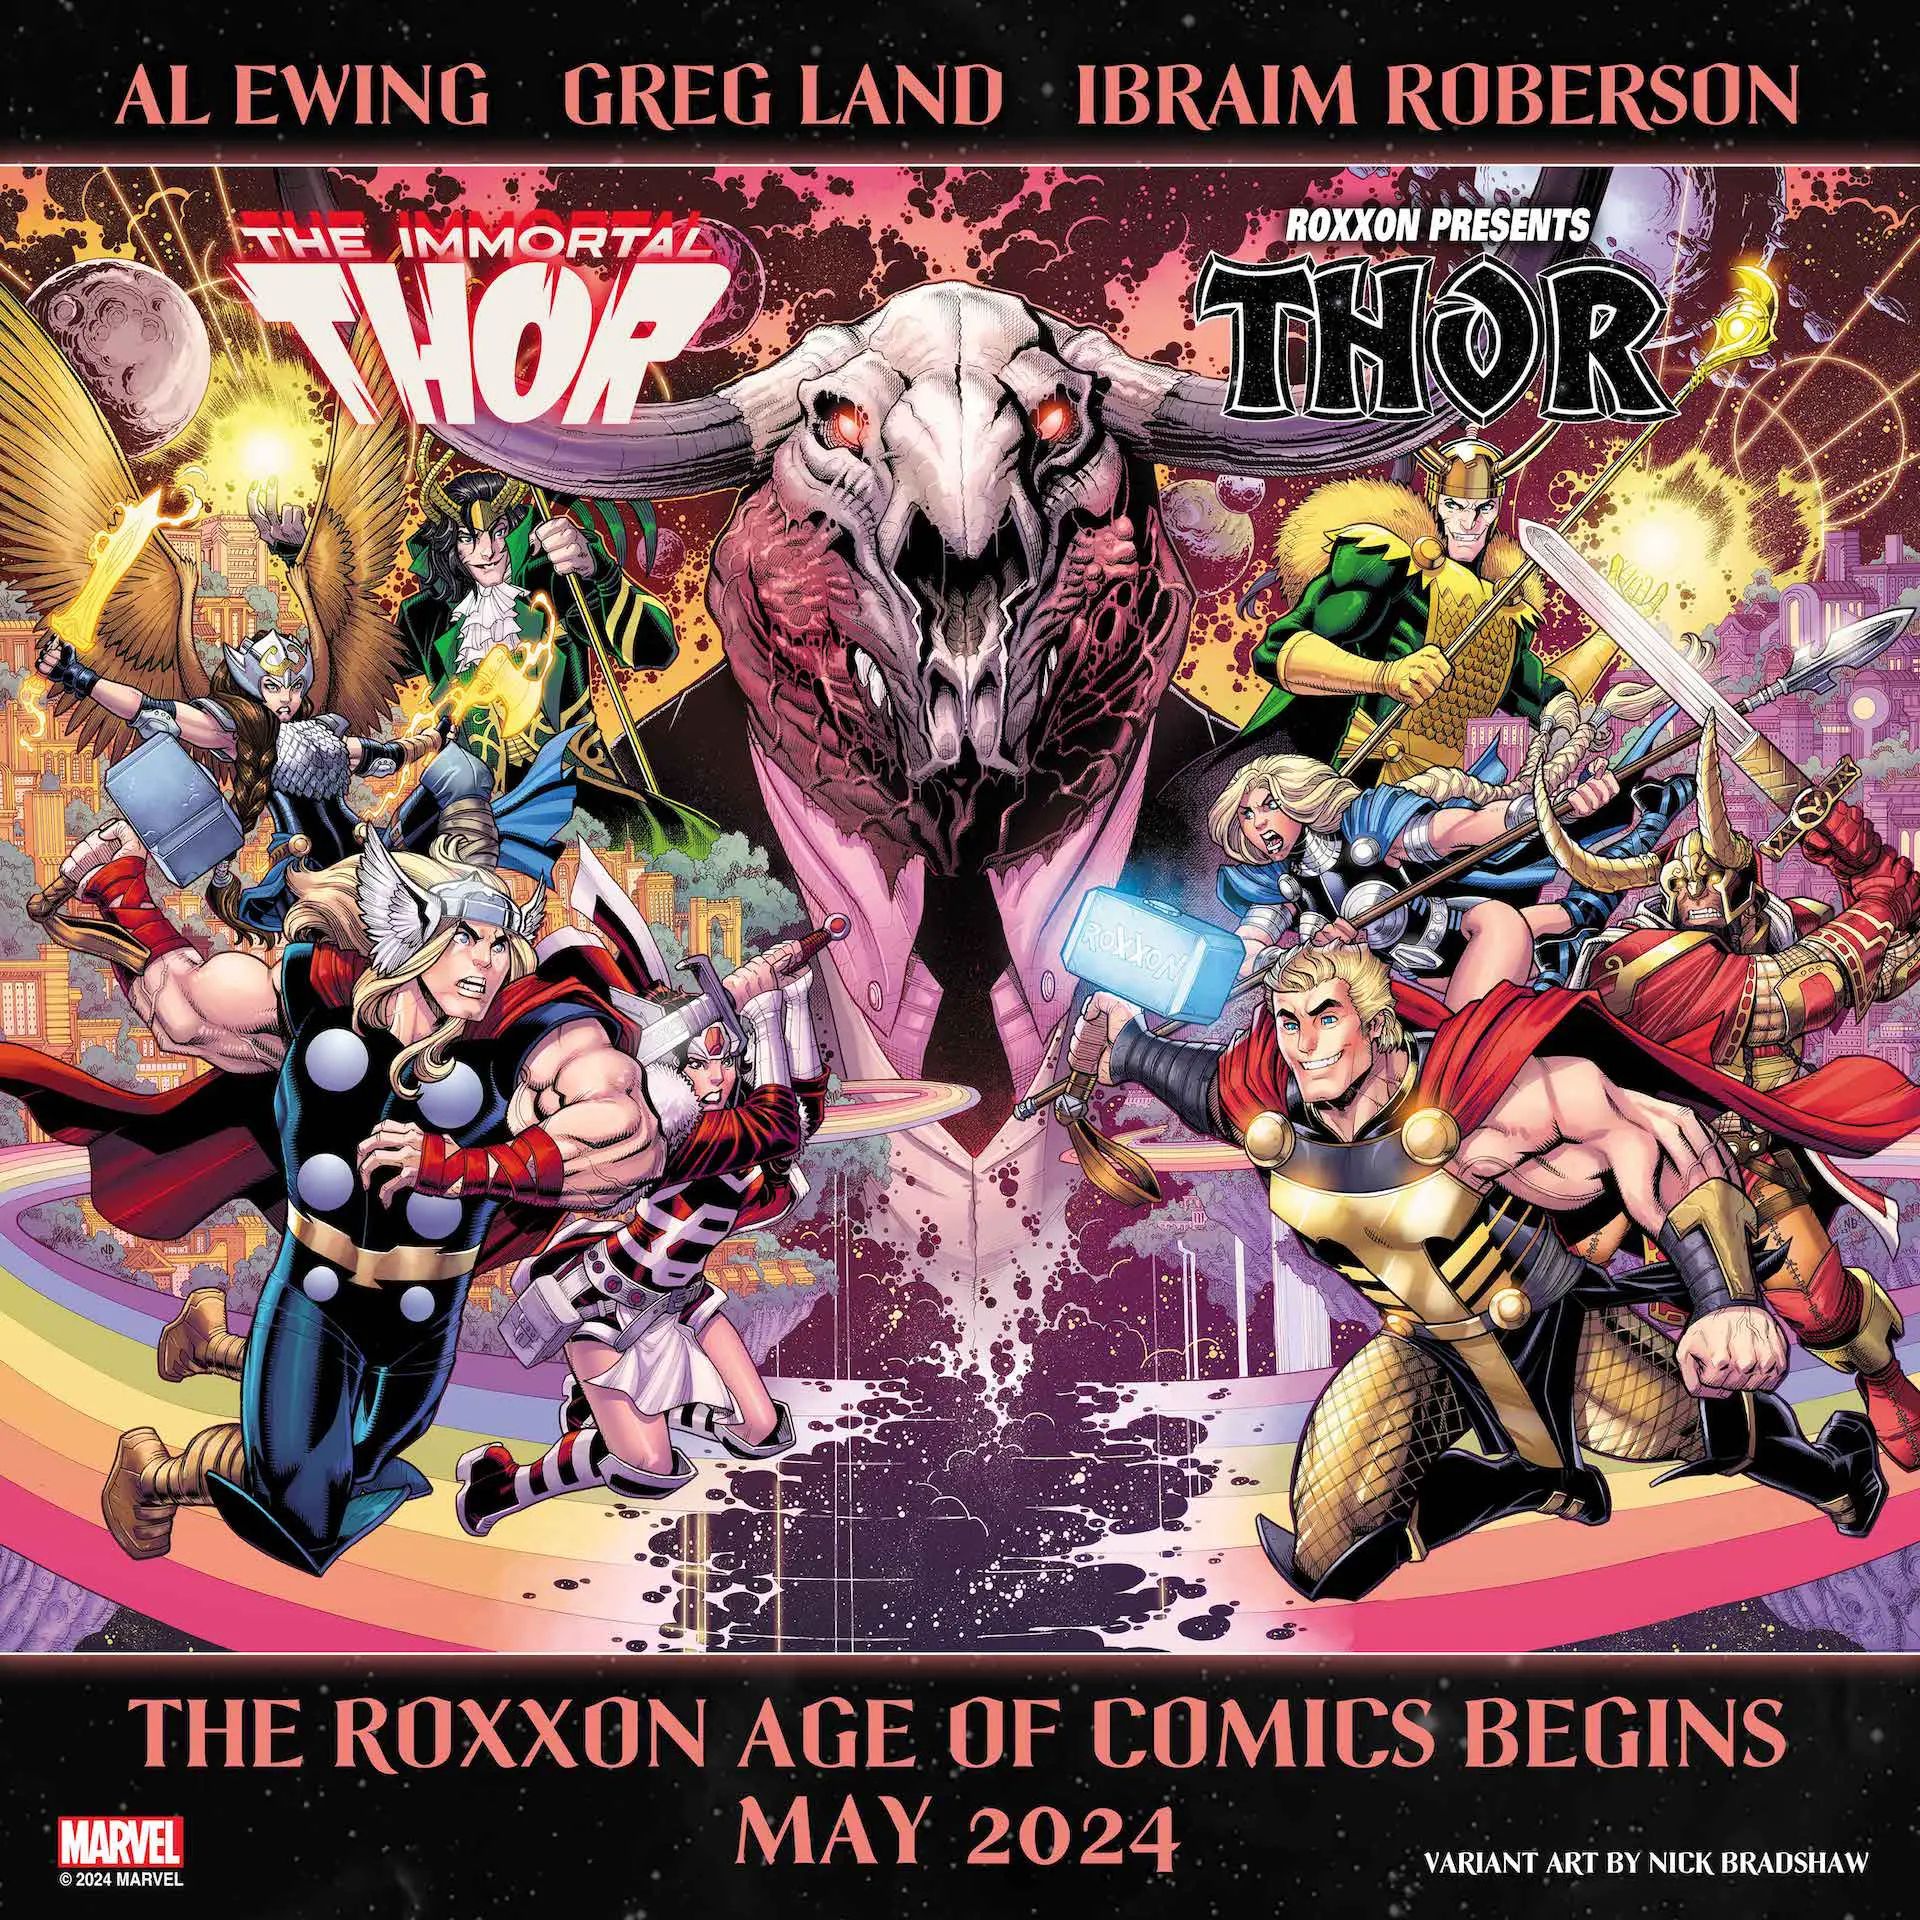 Marvel’s Most Evil Company Is Launching Its Own Thor Replacement as “THE ROXXON AGE OF COMICS BEGINS”